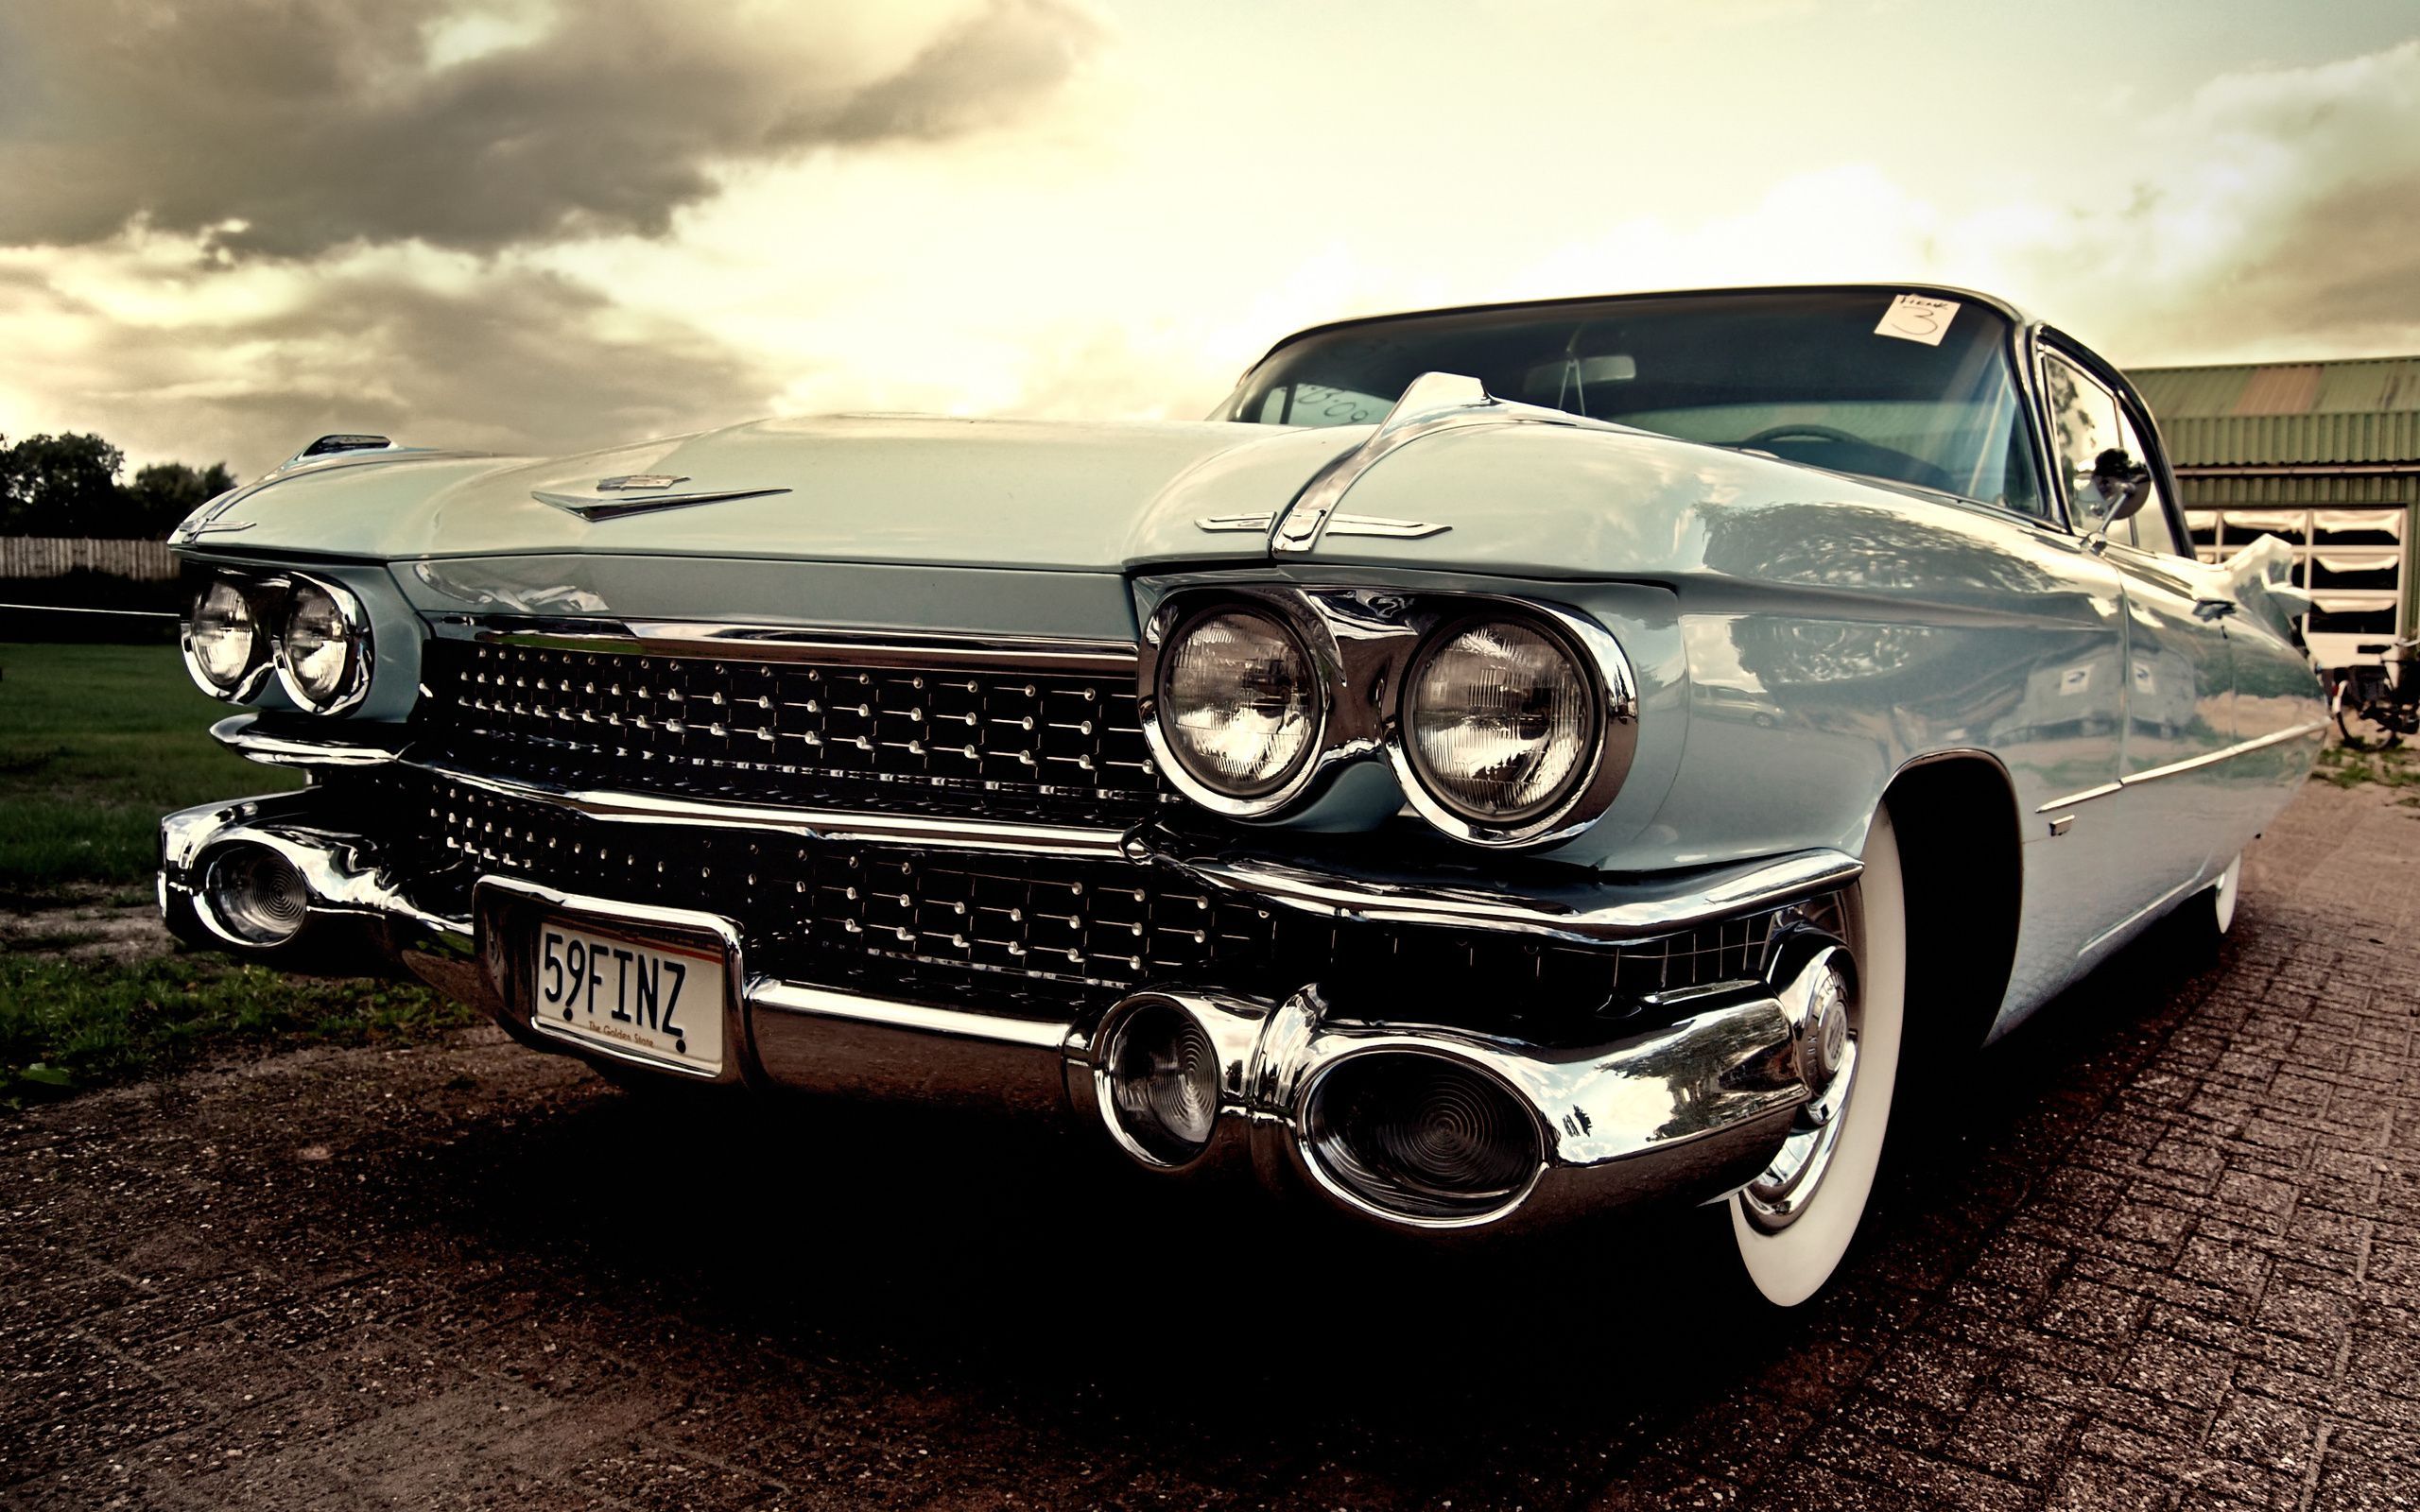 Finding A Buyer For Your Classic Car | Get latest vehicle updates here